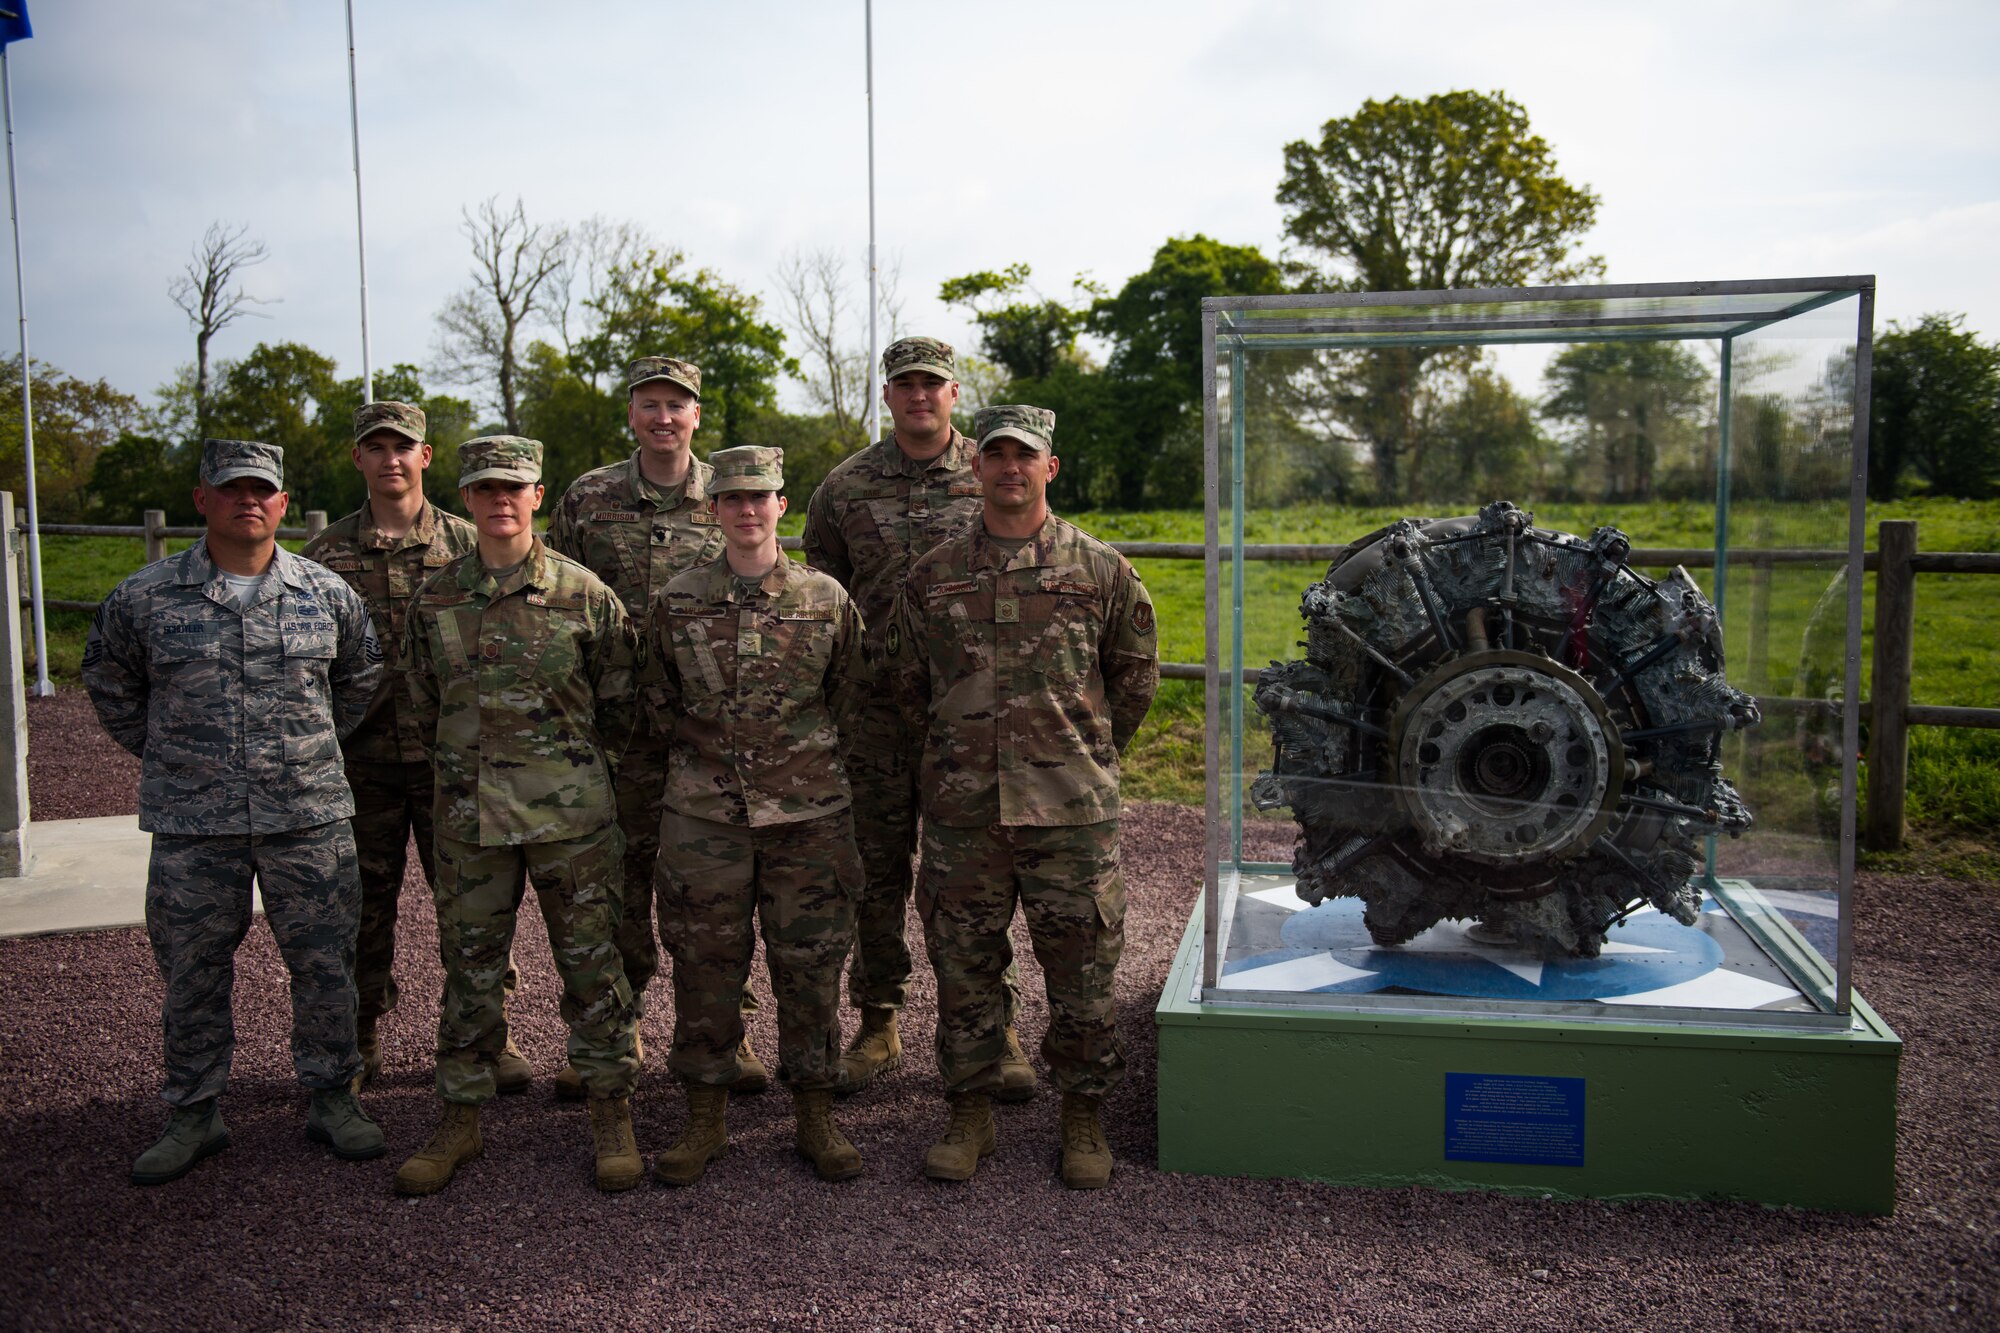 U.S. Air Force Airmen assigned to the 435th Construction Training Squadron, stand at parade rest next to a newly refurbished WWII aircraft engine display in Picauville, France, May 1, 2019. The Airmen worked together to refurbish the display case and the surrounding memorial in preparation for the 75th Anniversary of D-Day. (U.S. Air Force photo by Staff Sgt. Devin Boyer)